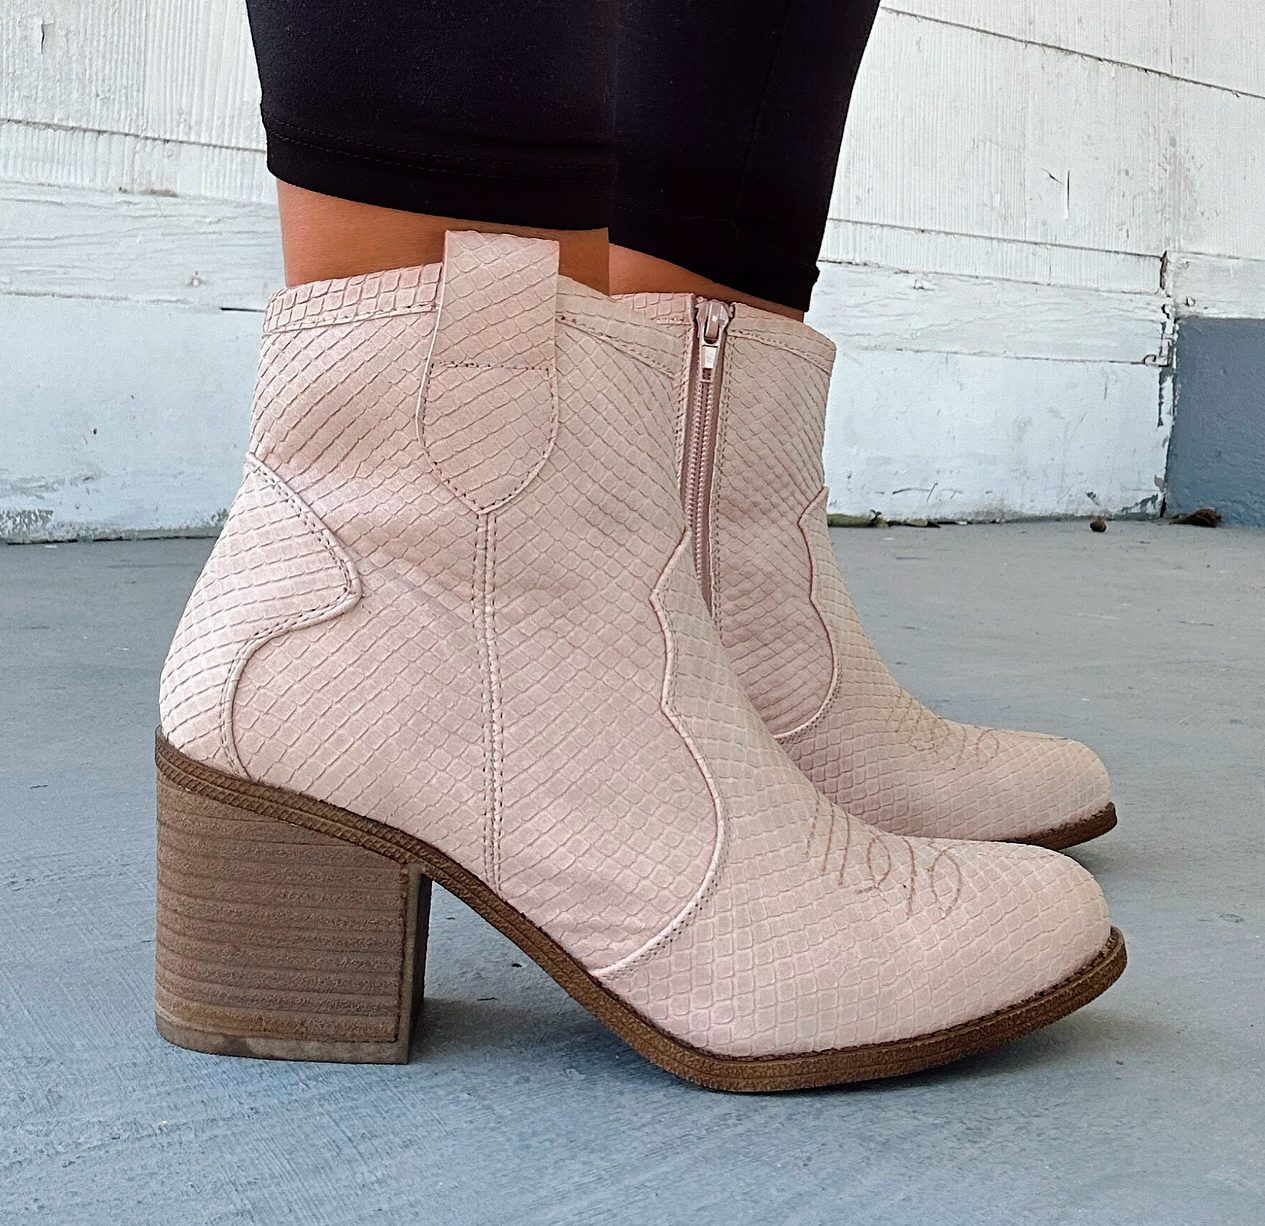 Blushing Babe Bootie shoes